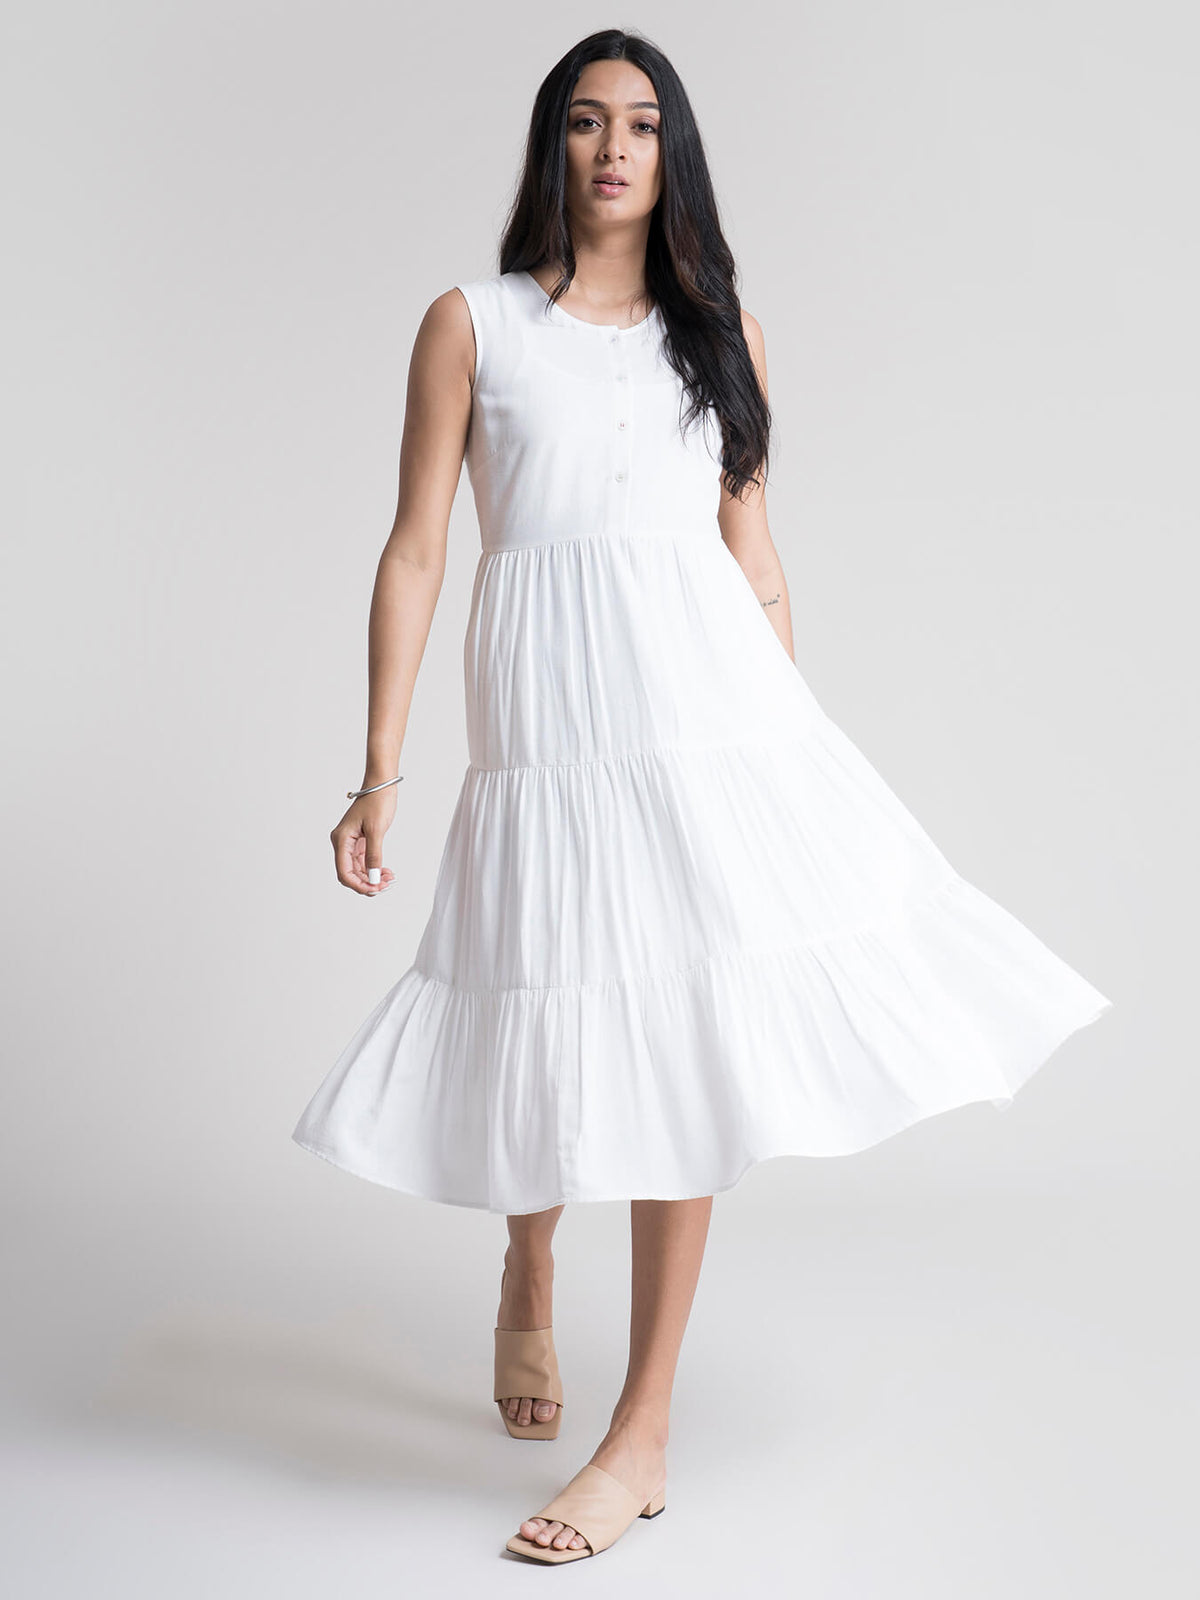 Cotton 3 Tiered A-Line Dress - White